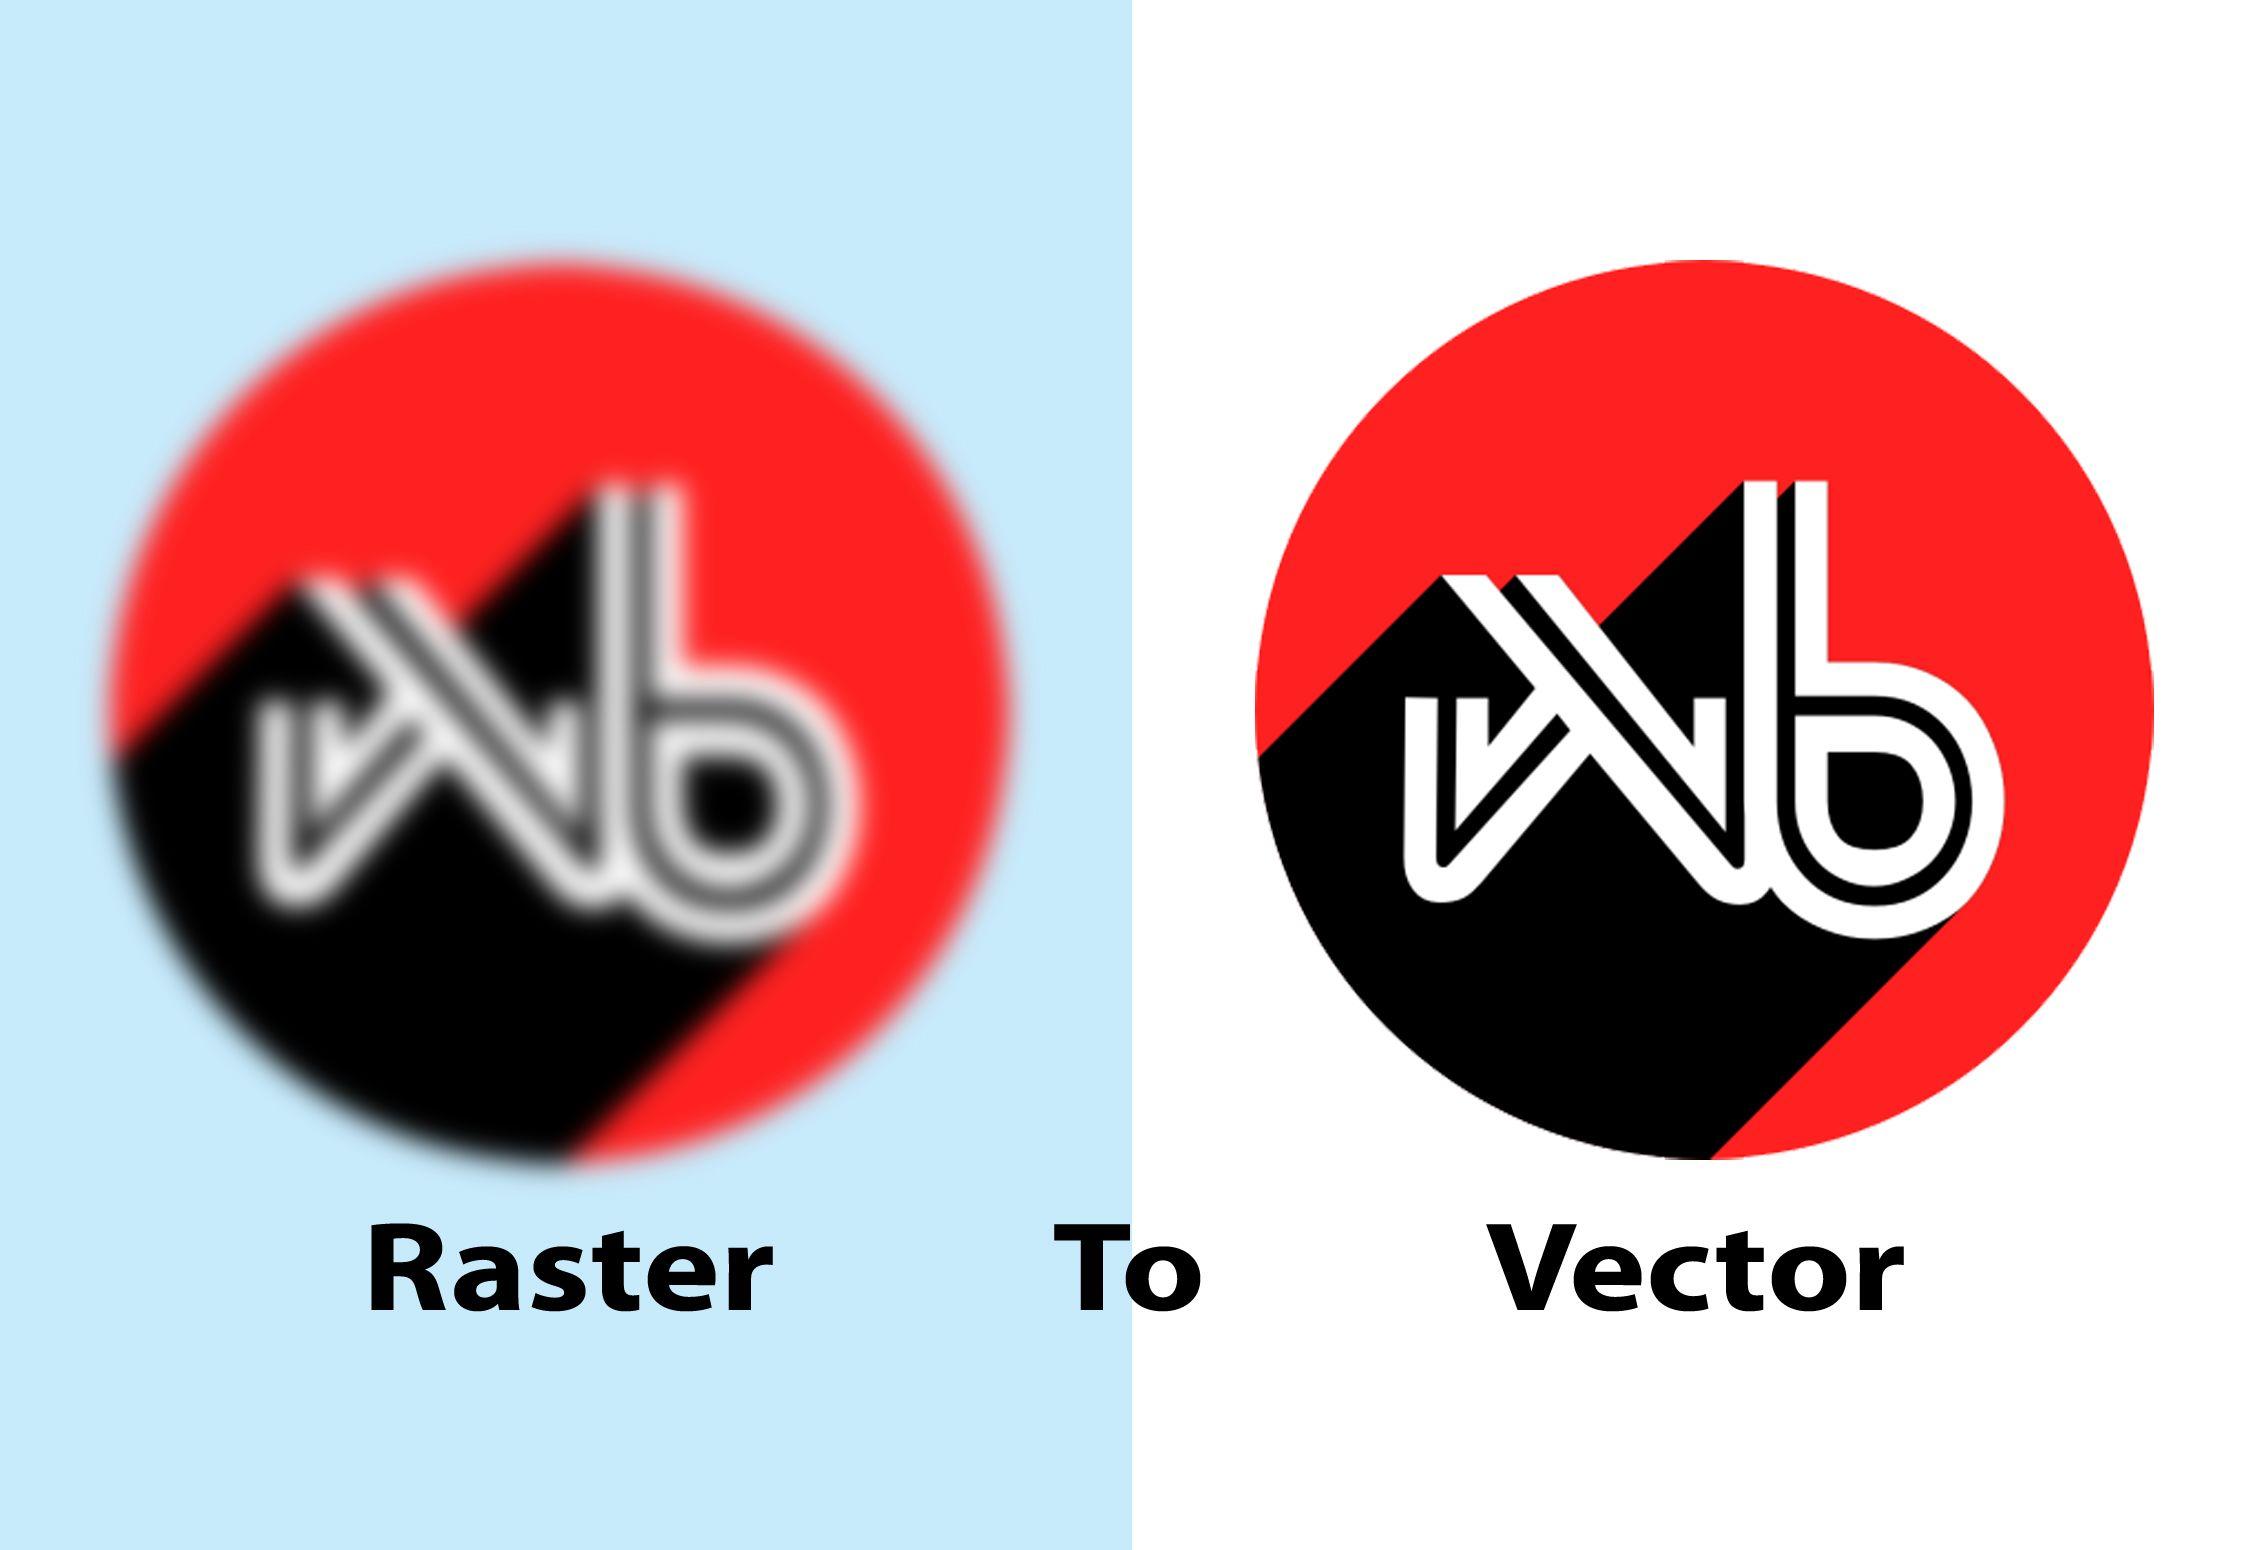 Blurry Logo - I WILL DO VECTOR TRACE OR IMAGE TO VECTOR ANY LOW RESOLUTION / FUZZY